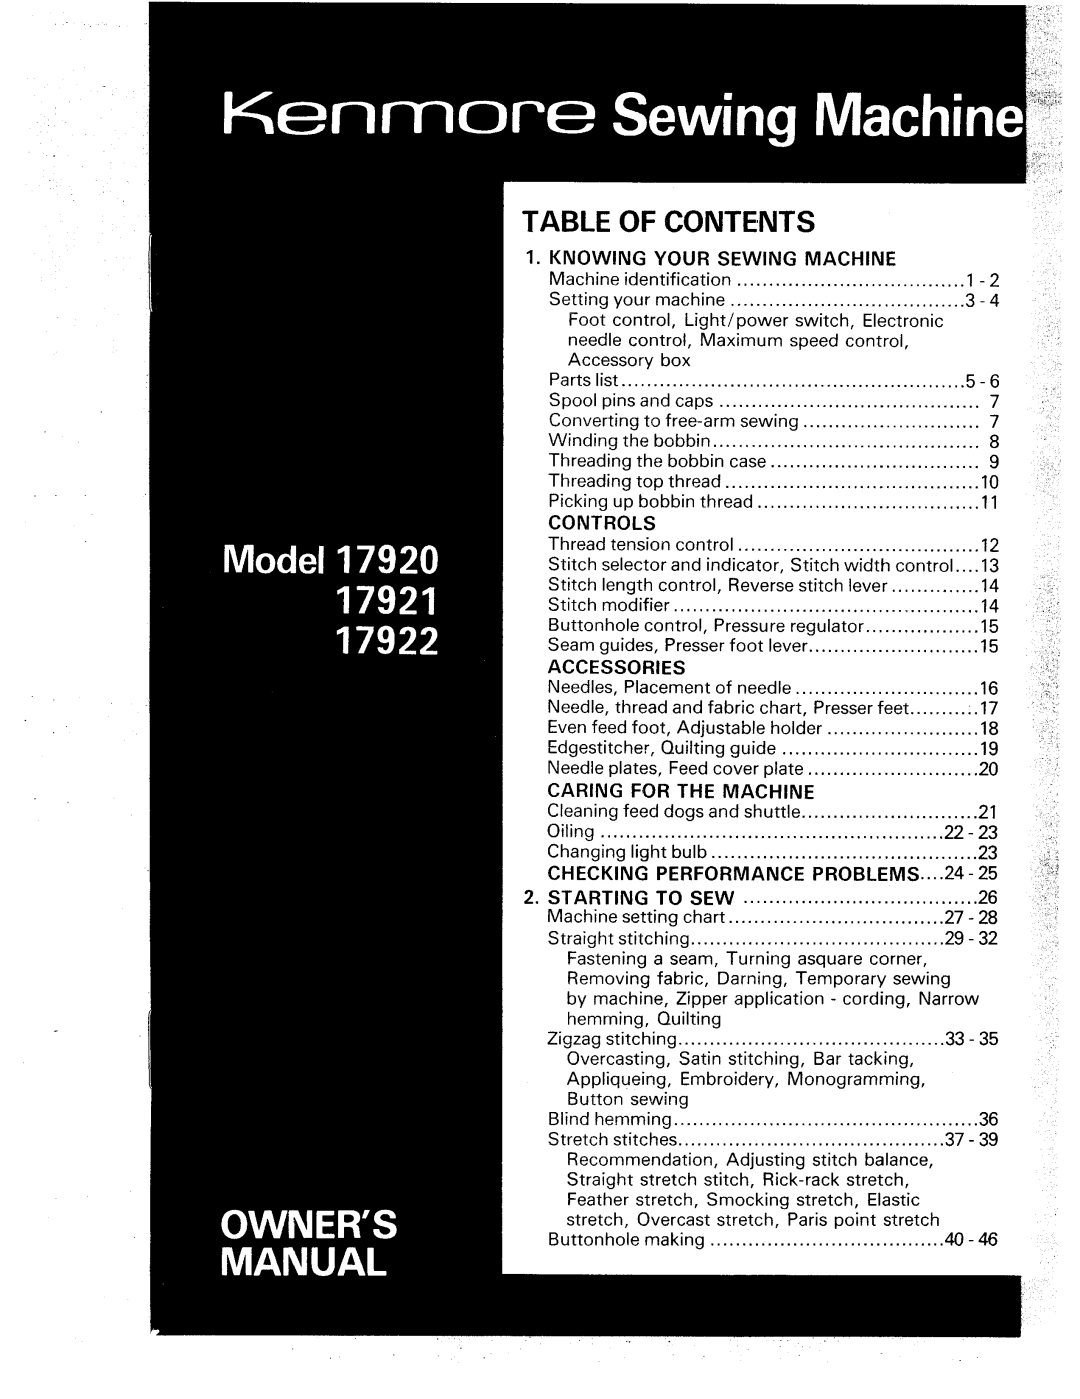 Kenmore 17922, 17920 manual Table Of Contents 